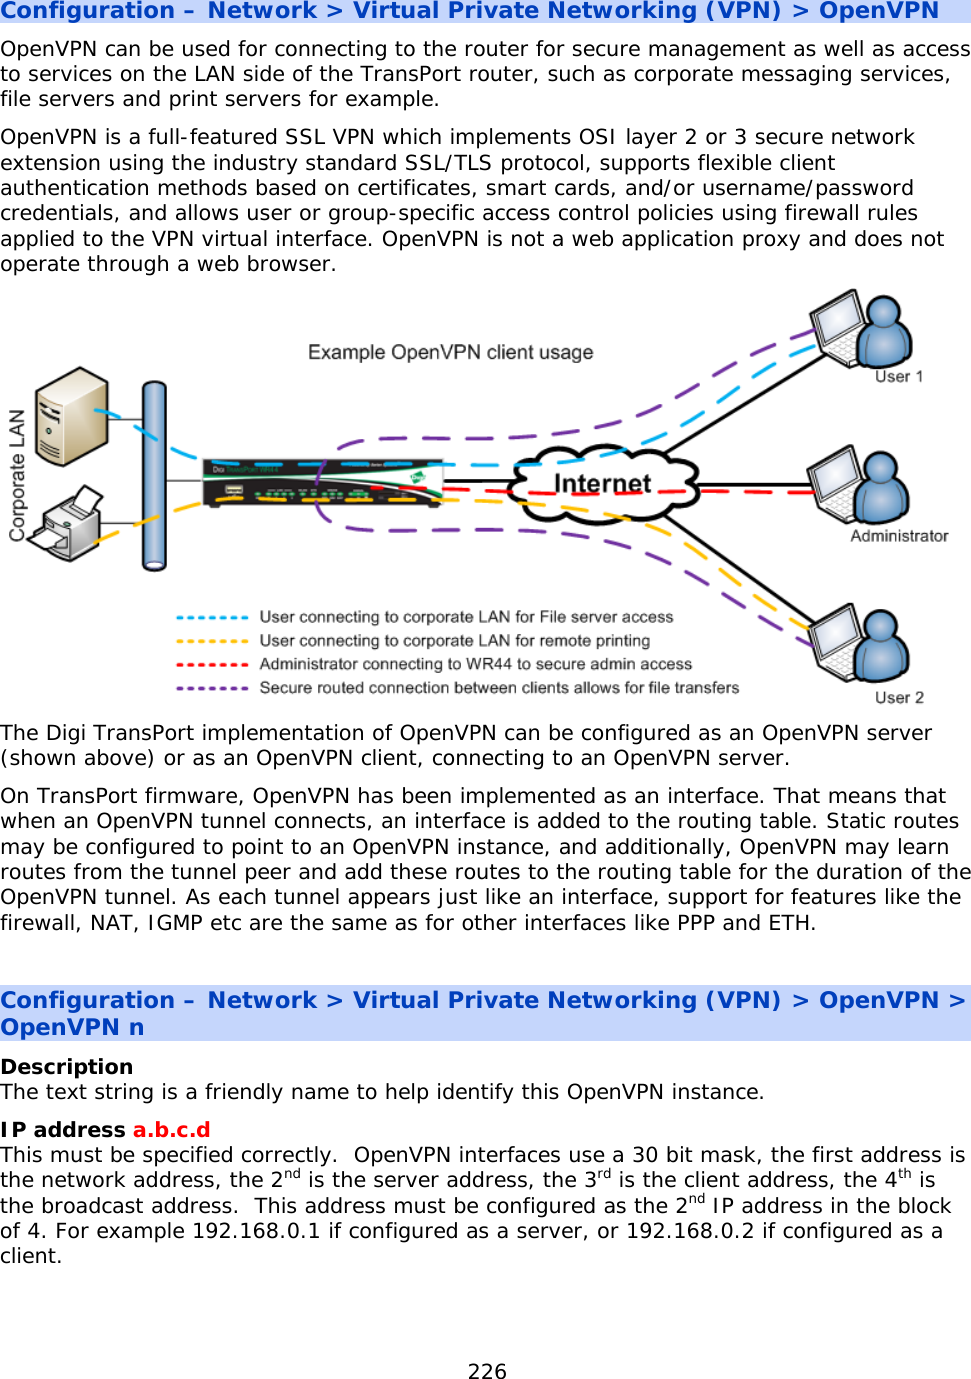 226  Configuration – Network &gt; Virtual Private Networking (VPN) &gt; OpenVPN OpenVPN can be used for connecting to the router for secure management as well as access to services on the LAN side of the TransPort router, such as corporate messaging services, file servers and print servers for example. OpenVPN is a full-featured SSL VPN which implements OSI layer 2 or 3 secure network extension using the industry standard SSL/TLS protocol, supports flexible client authentication methods based on certificates, smart cards, and/or username/password credentials, and allows user or group-specific access control policies using firewall rules applied to the VPN virtual interface. OpenVPN is not a web application proxy and does not operate through a web browser.  The Digi TransPort implementation of OpenVPN can be configured as an OpenVPN server (shown above) or as an OpenVPN client, connecting to an OpenVPN server. On TransPort firmware, OpenVPN has been implemented as an interface. That means that when an OpenVPN tunnel connects, an interface is added to the routing table. Static routes may be configured to point to an OpenVPN instance, and additionally, OpenVPN may learn routes from the tunnel peer and add these routes to the routing table for the duration of the OpenVPN tunnel. As each tunnel appears just like an interface, support for features like the firewall, NAT, IGMP etc are the same as for other interfaces like PPP and ETH.  Configuration – Network &gt; Virtual Private Networking (VPN) &gt; OpenVPN &gt; OpenVPN n Description The text string is a friendly name to help identify this OpenVPN instance. IP address a.b.c.d This must be specified correctly.  OpenVPN interfaces use a 30 bit mask, the first address is the network address, the 2nd is the server address, the 3rd is the client address, the 4th is the broadcast address.  This address must be configured as the 2nd IP address in the block of 4. For example 192.168.0.1 if configured as a server, or 192.168.0.2 if configured as a client.   